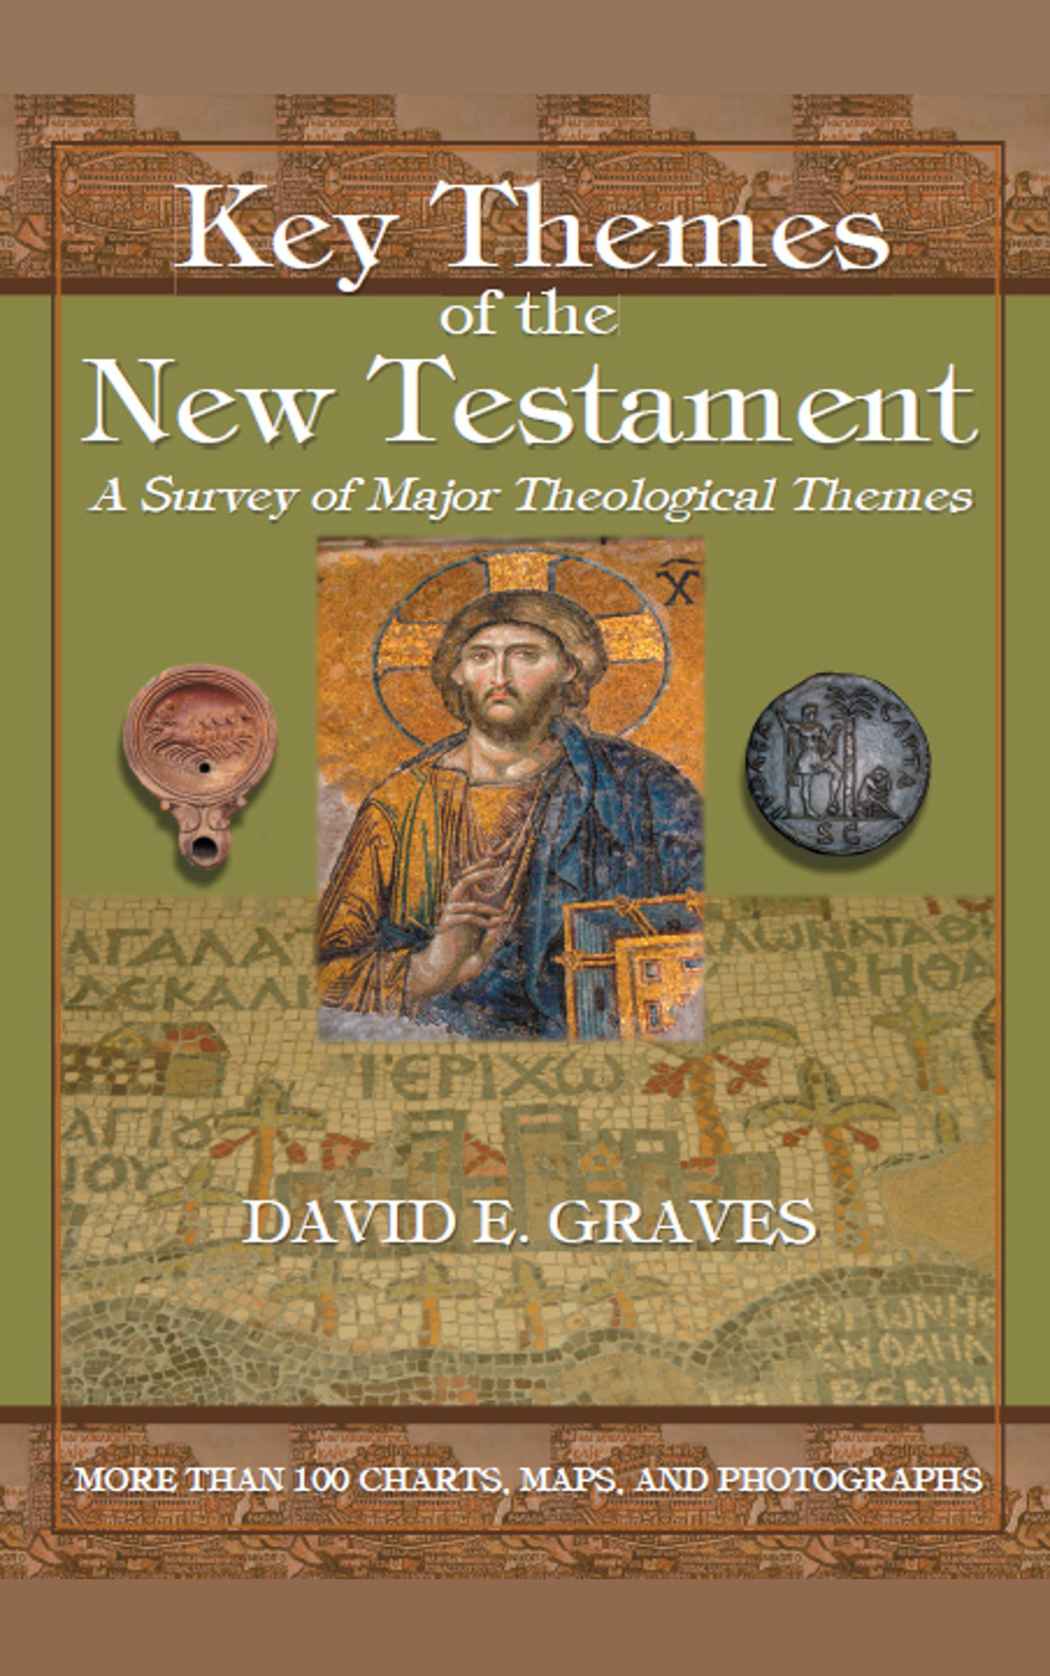 Key Themes of the New Testament: A Survey of Major Theological Themes